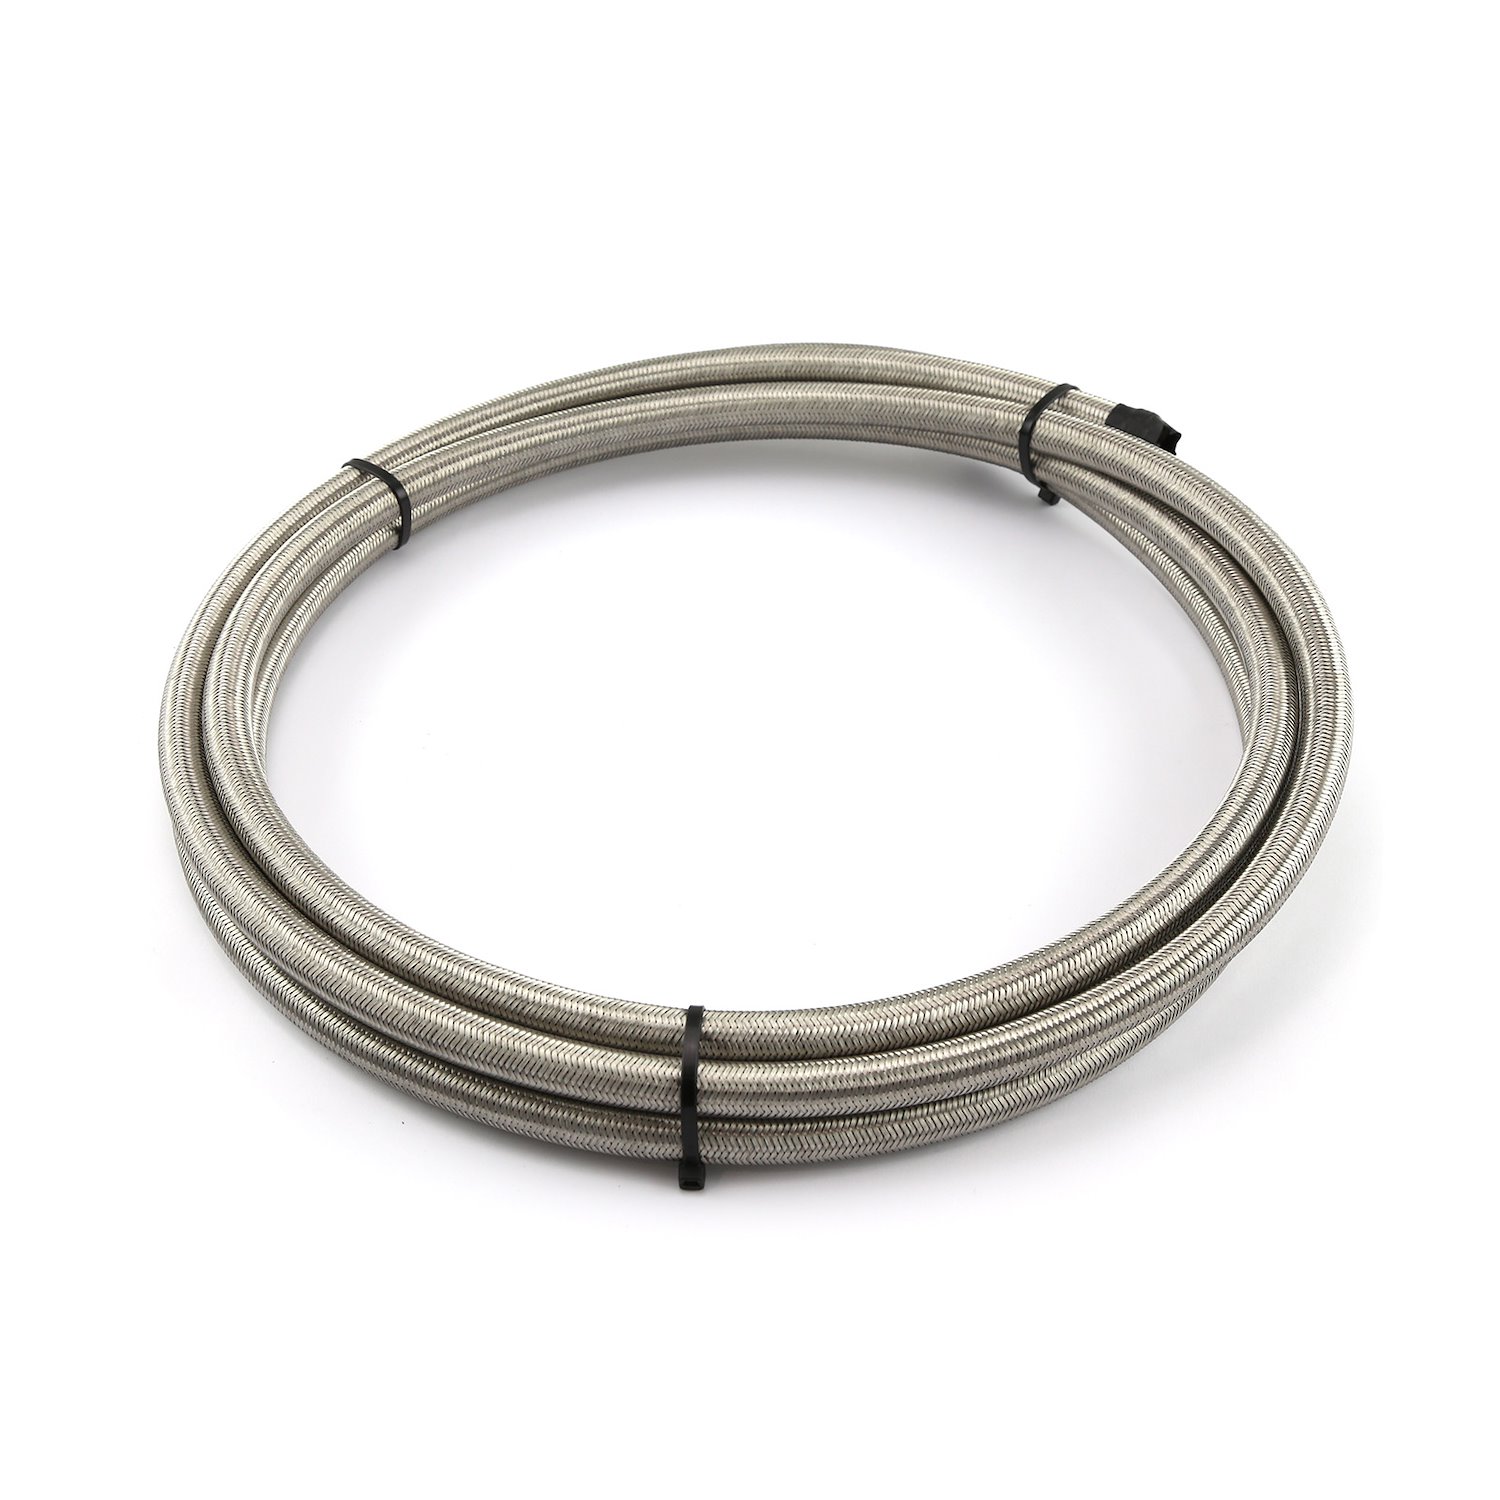 100 Series Stainless Steel Braided Hose -8 AN